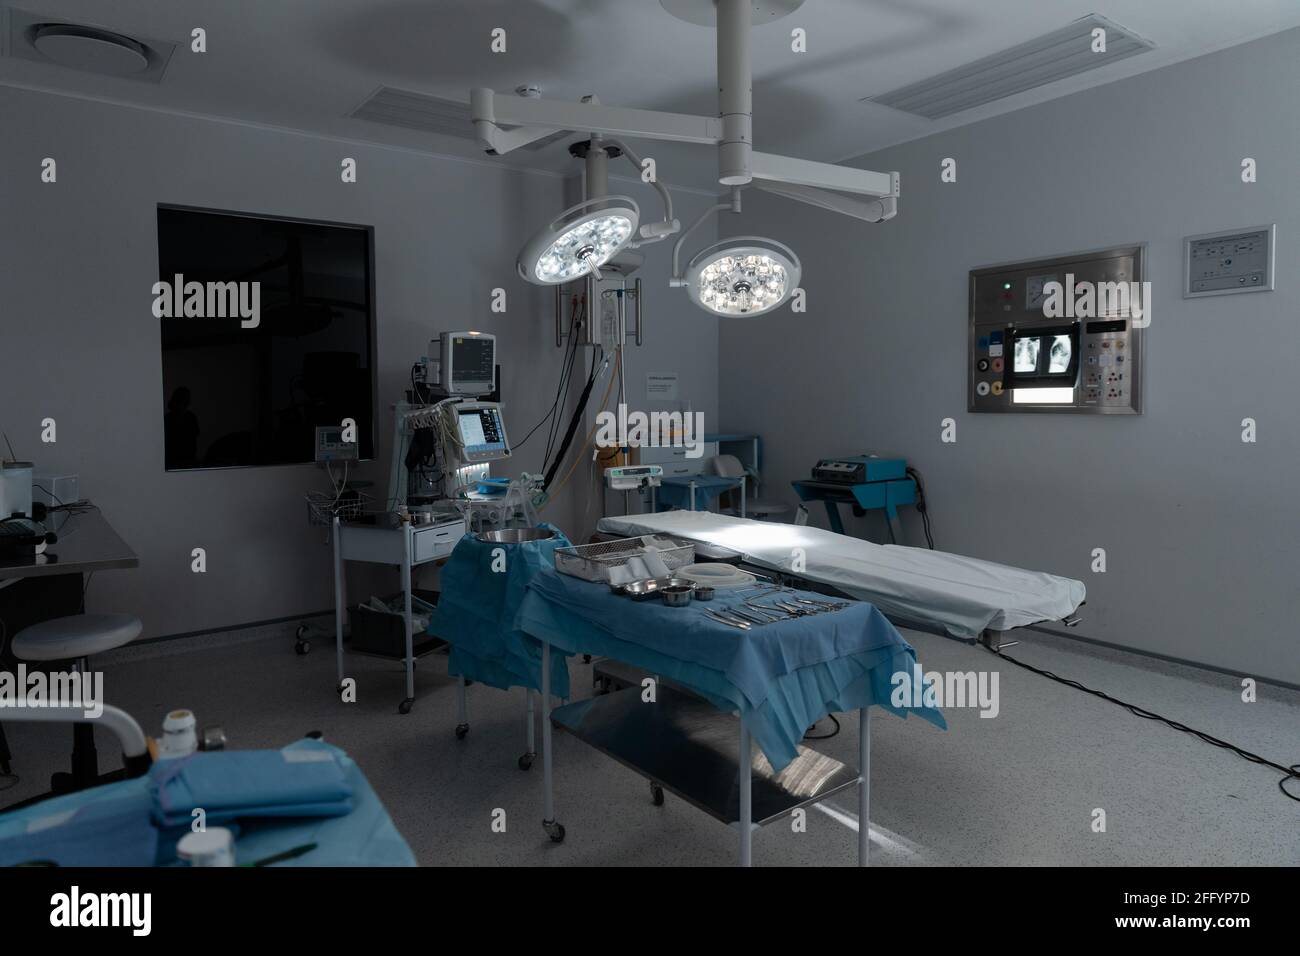 Surgical instruments, operating table, lights and equipment in modern hospital operating theatre Stock Photo